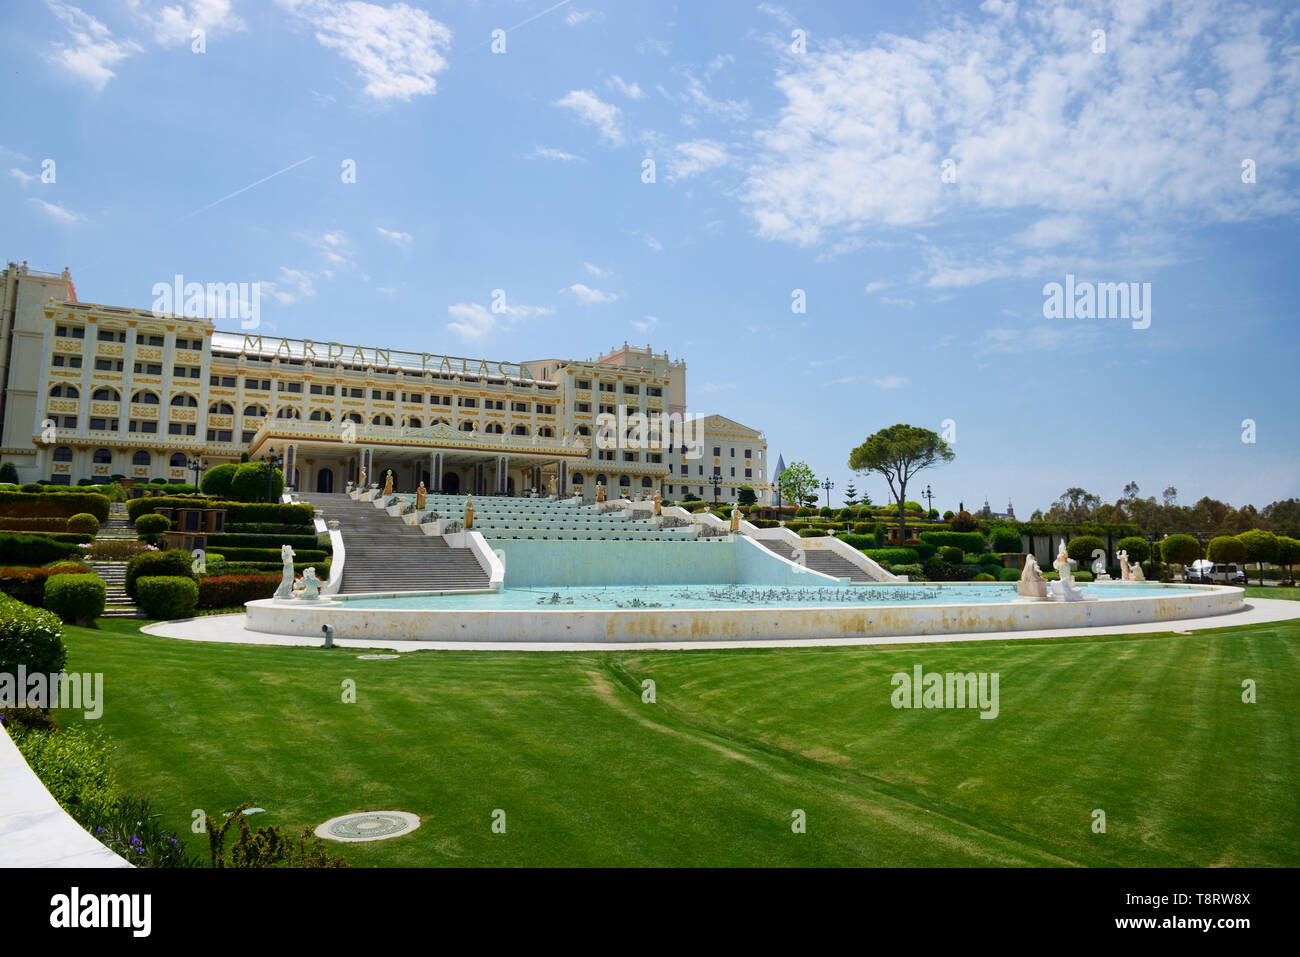 ANTALYA, TURKEY - APRIL 23: The Mardan Palace luxury hotel is considered Europes most expensive luxury resort on April 23, 2014 in Antalya, Turkey. It Stock Photo